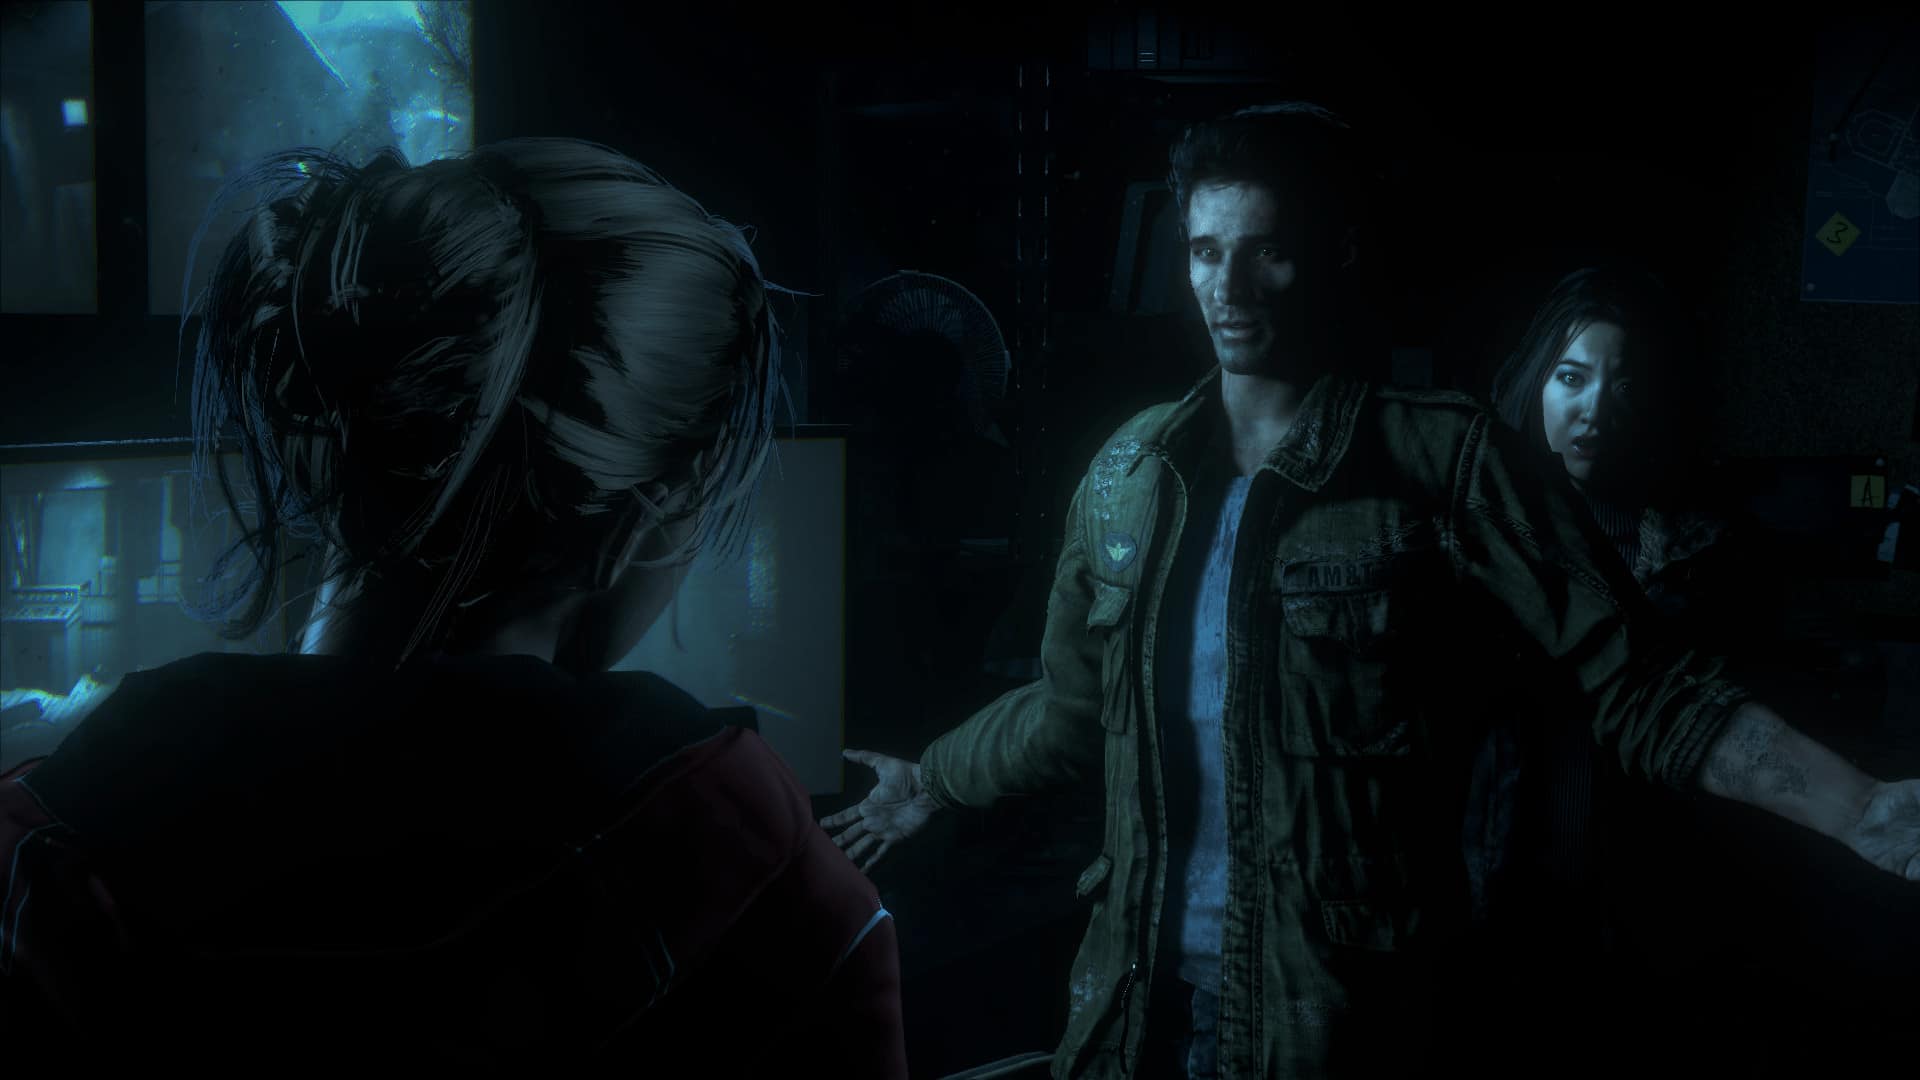 A New PS4 Exclusive: Until Dawn